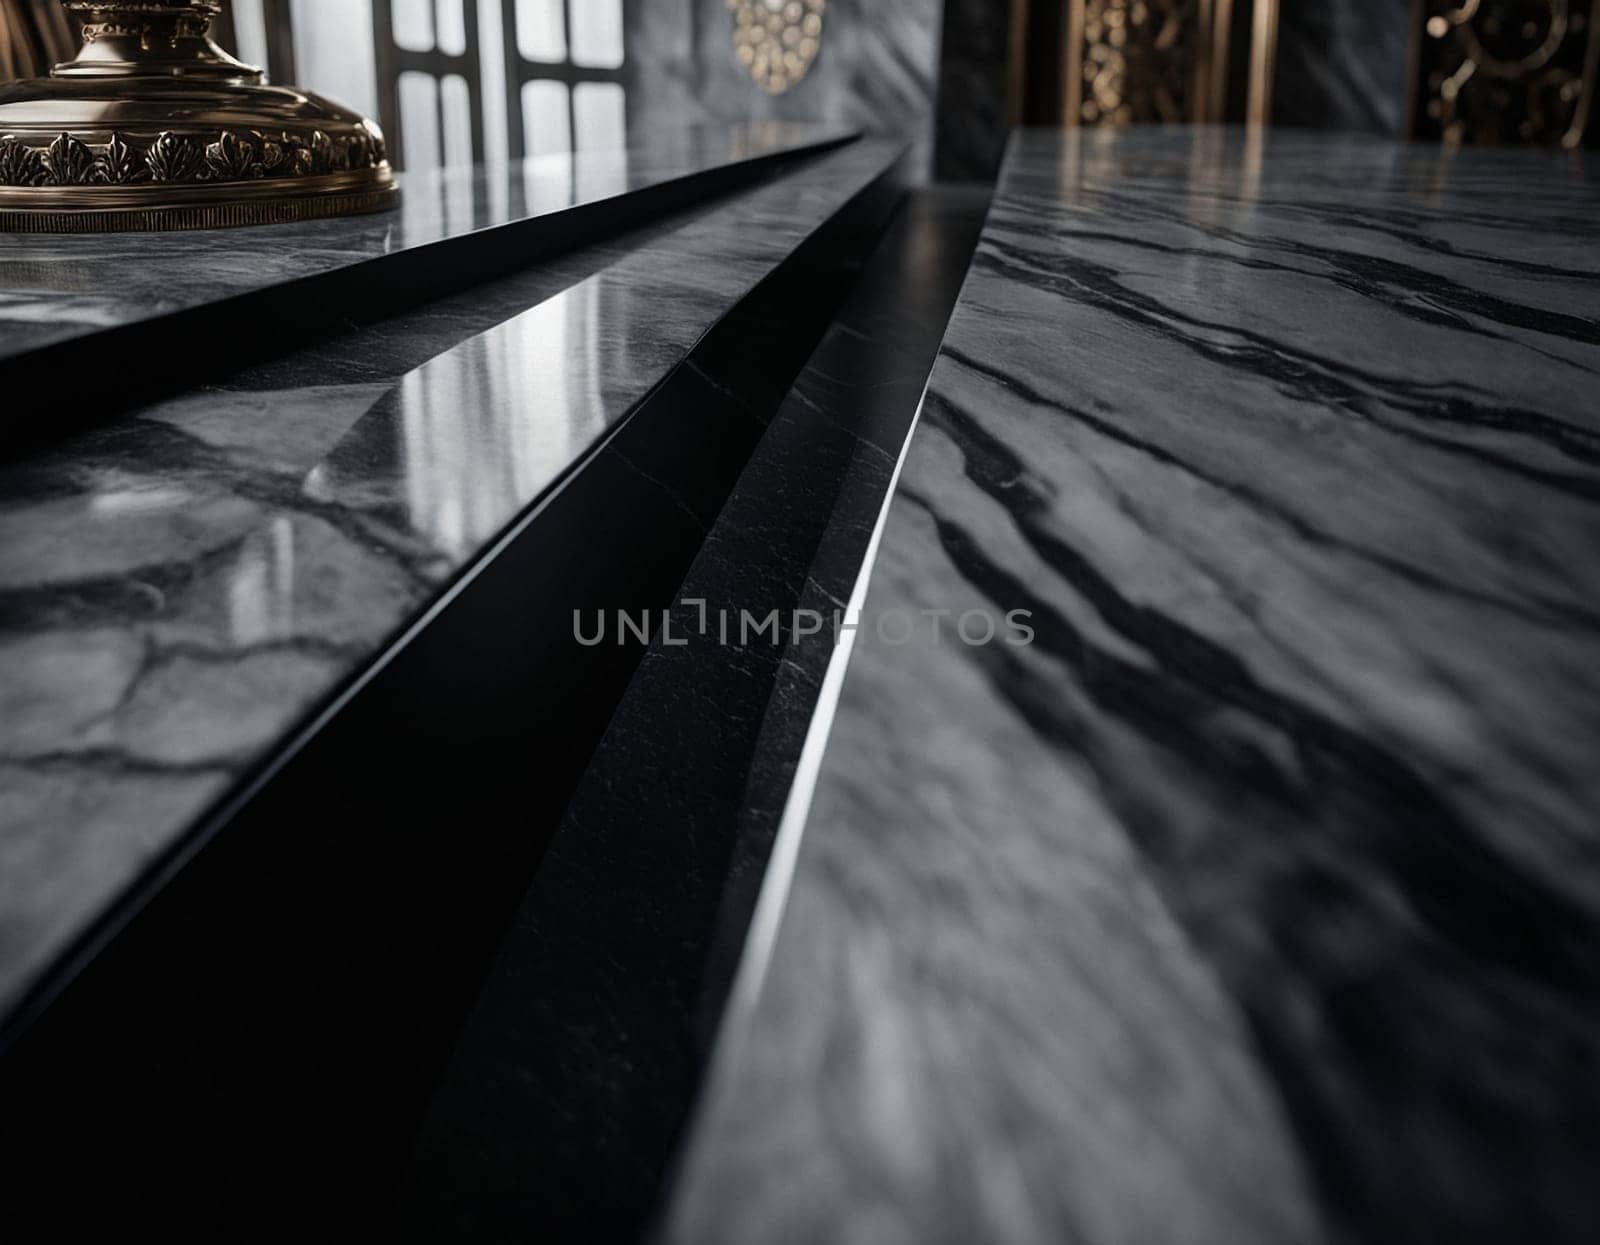 Professional interior design with expensive black marble and granite. Excellent background for presentation and product by NeuroSky